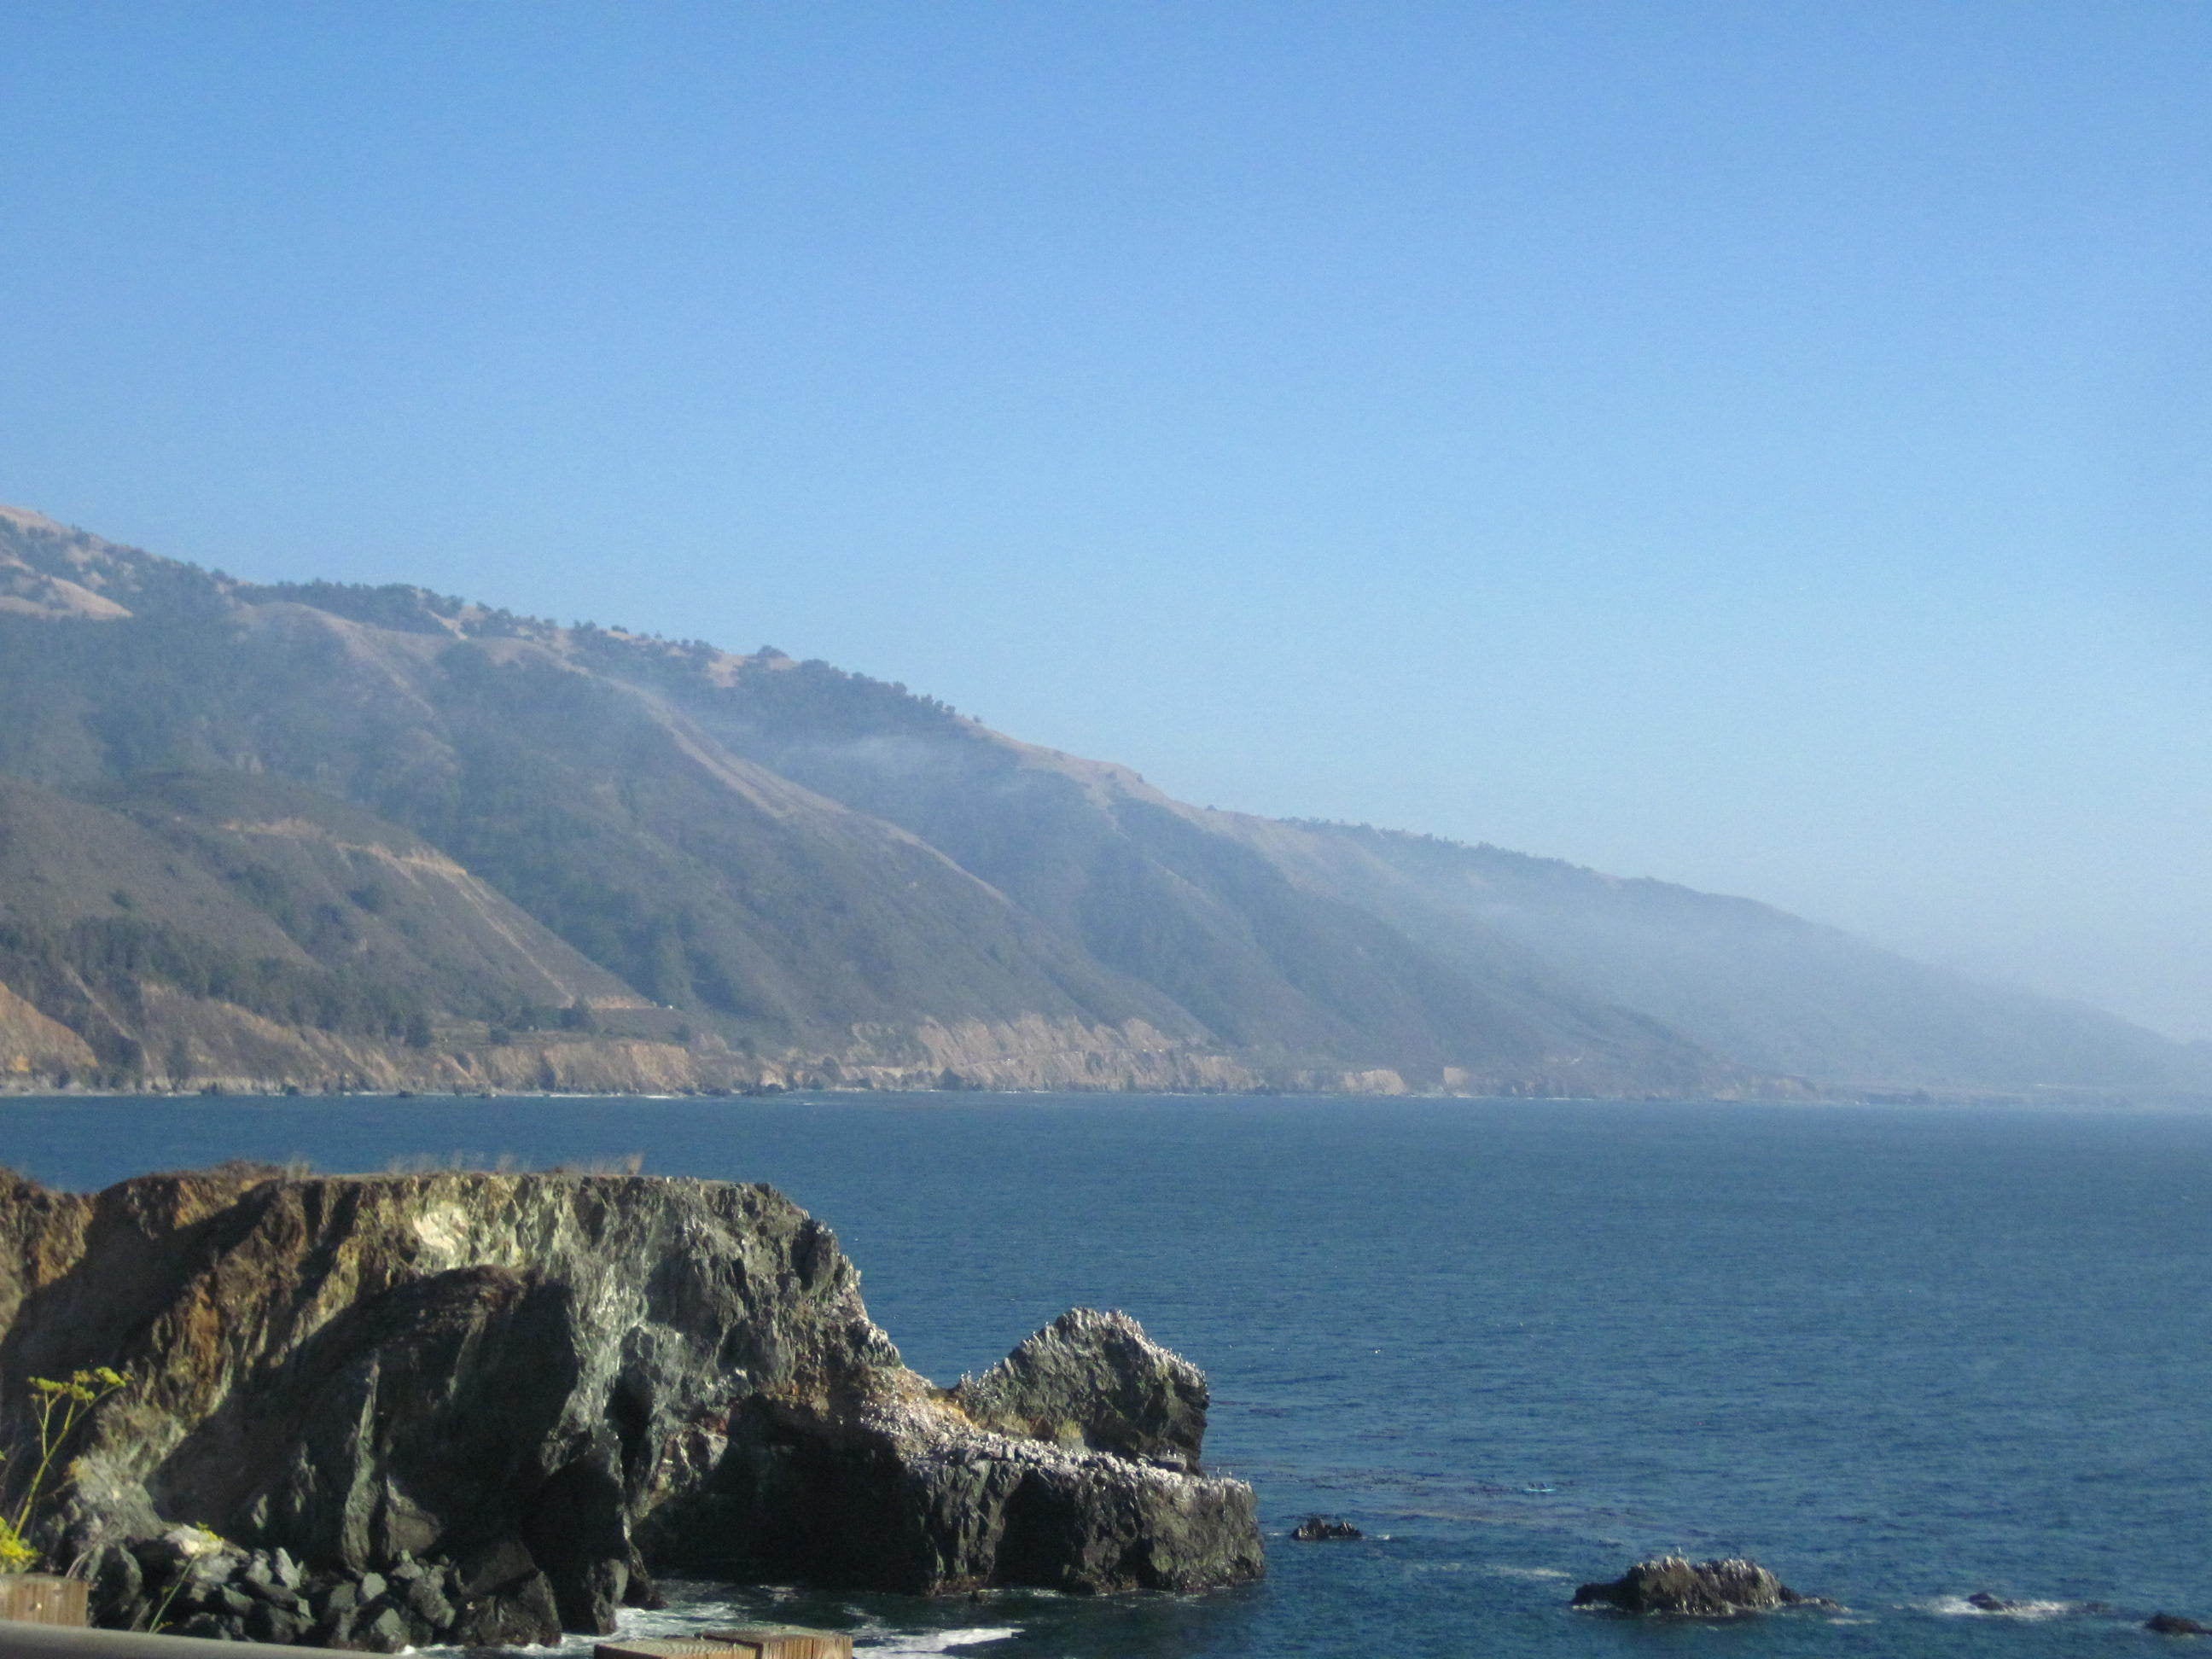 Camper submitted image from Pfeiffer Big Sur State Park - 3